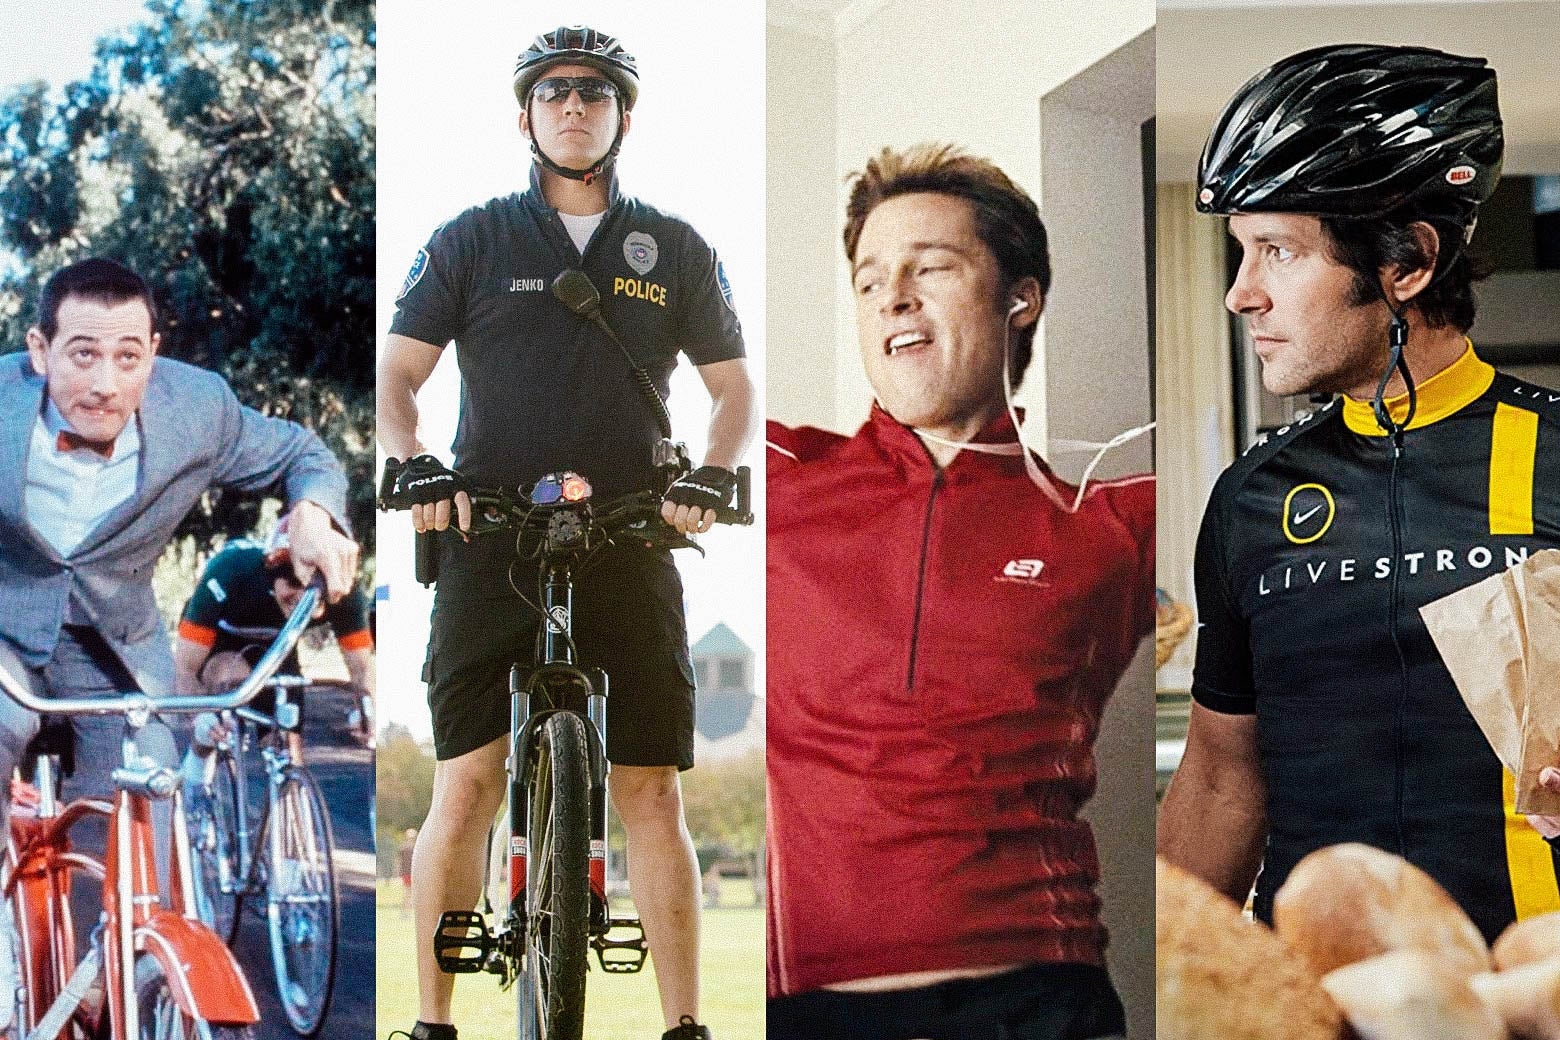 Pee-wee Herman, Channing Tatum in 21 Jump Street, Brad Pitt in Burn After Reading, and Paul Rudd in This Is 40, all looking like nerds on bikes or in bike gear.